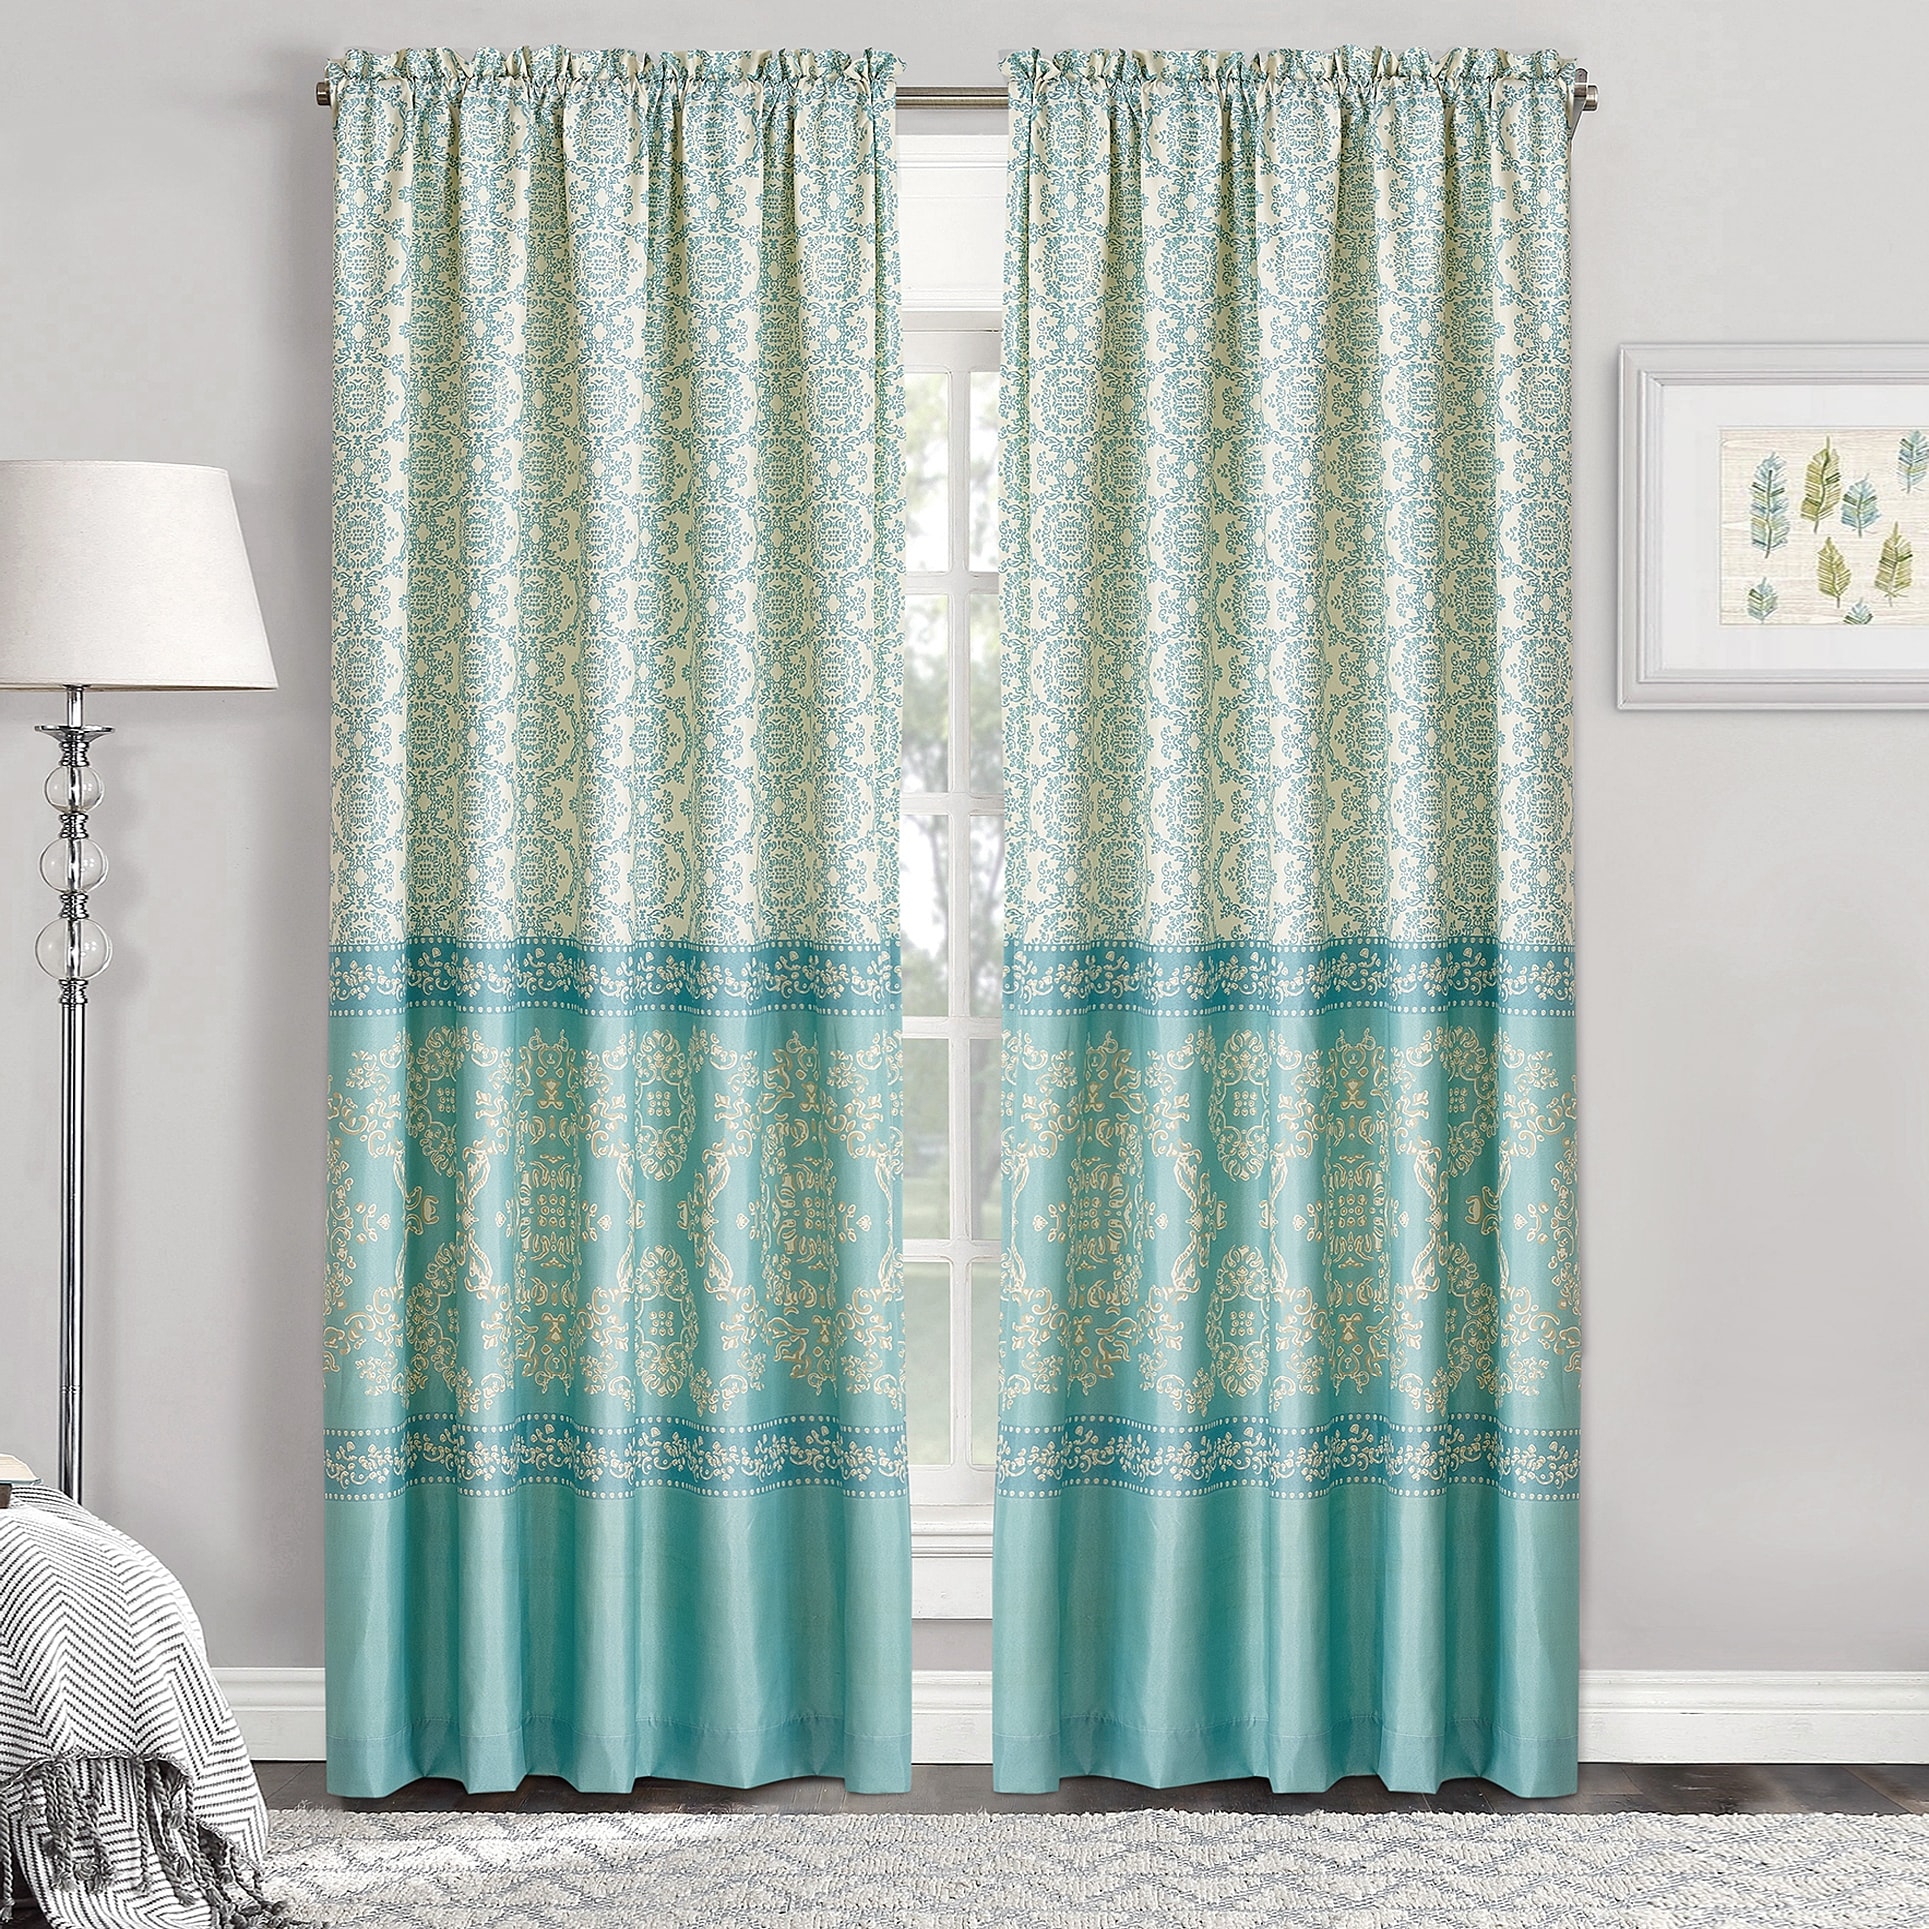 2 PCS 60"x 84" Solid Sheer Window Panels Curtains Brand New Curtains 